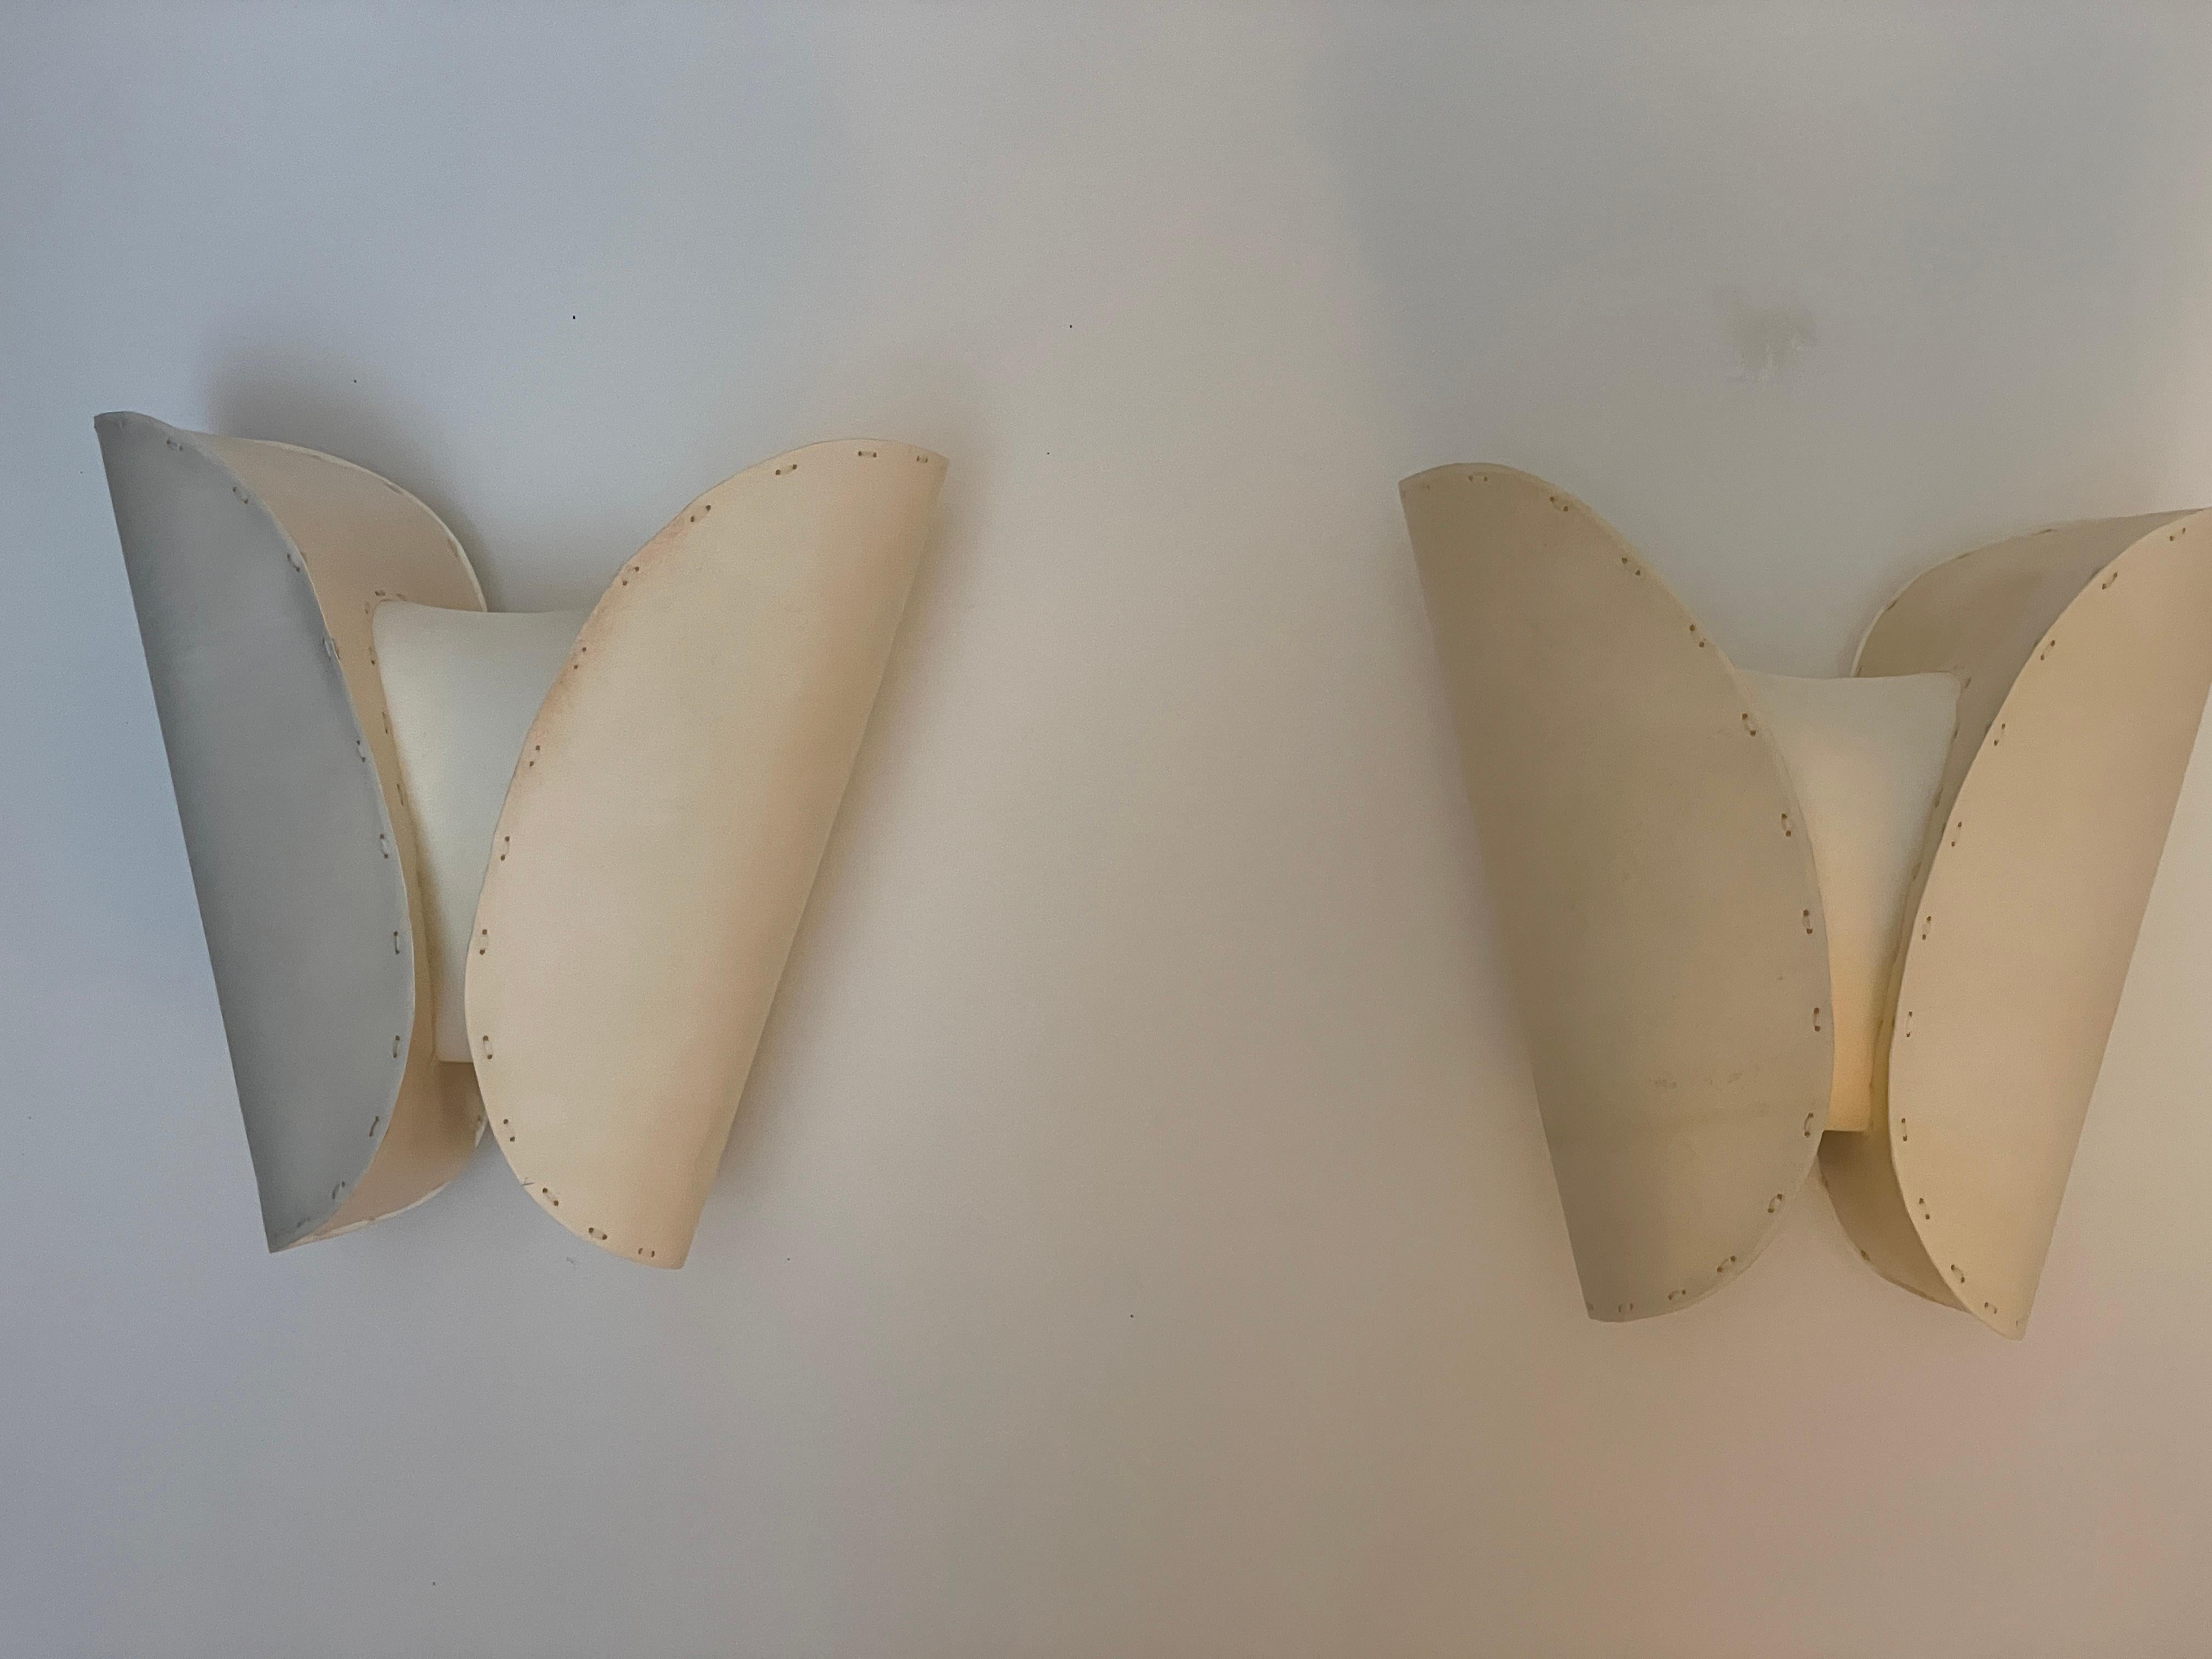 Contemporary Mauro Fabbro “Gstaad” Wall Lamps Sconce  Alexandre Biaggi  Botega Volta. Signed  For Sale